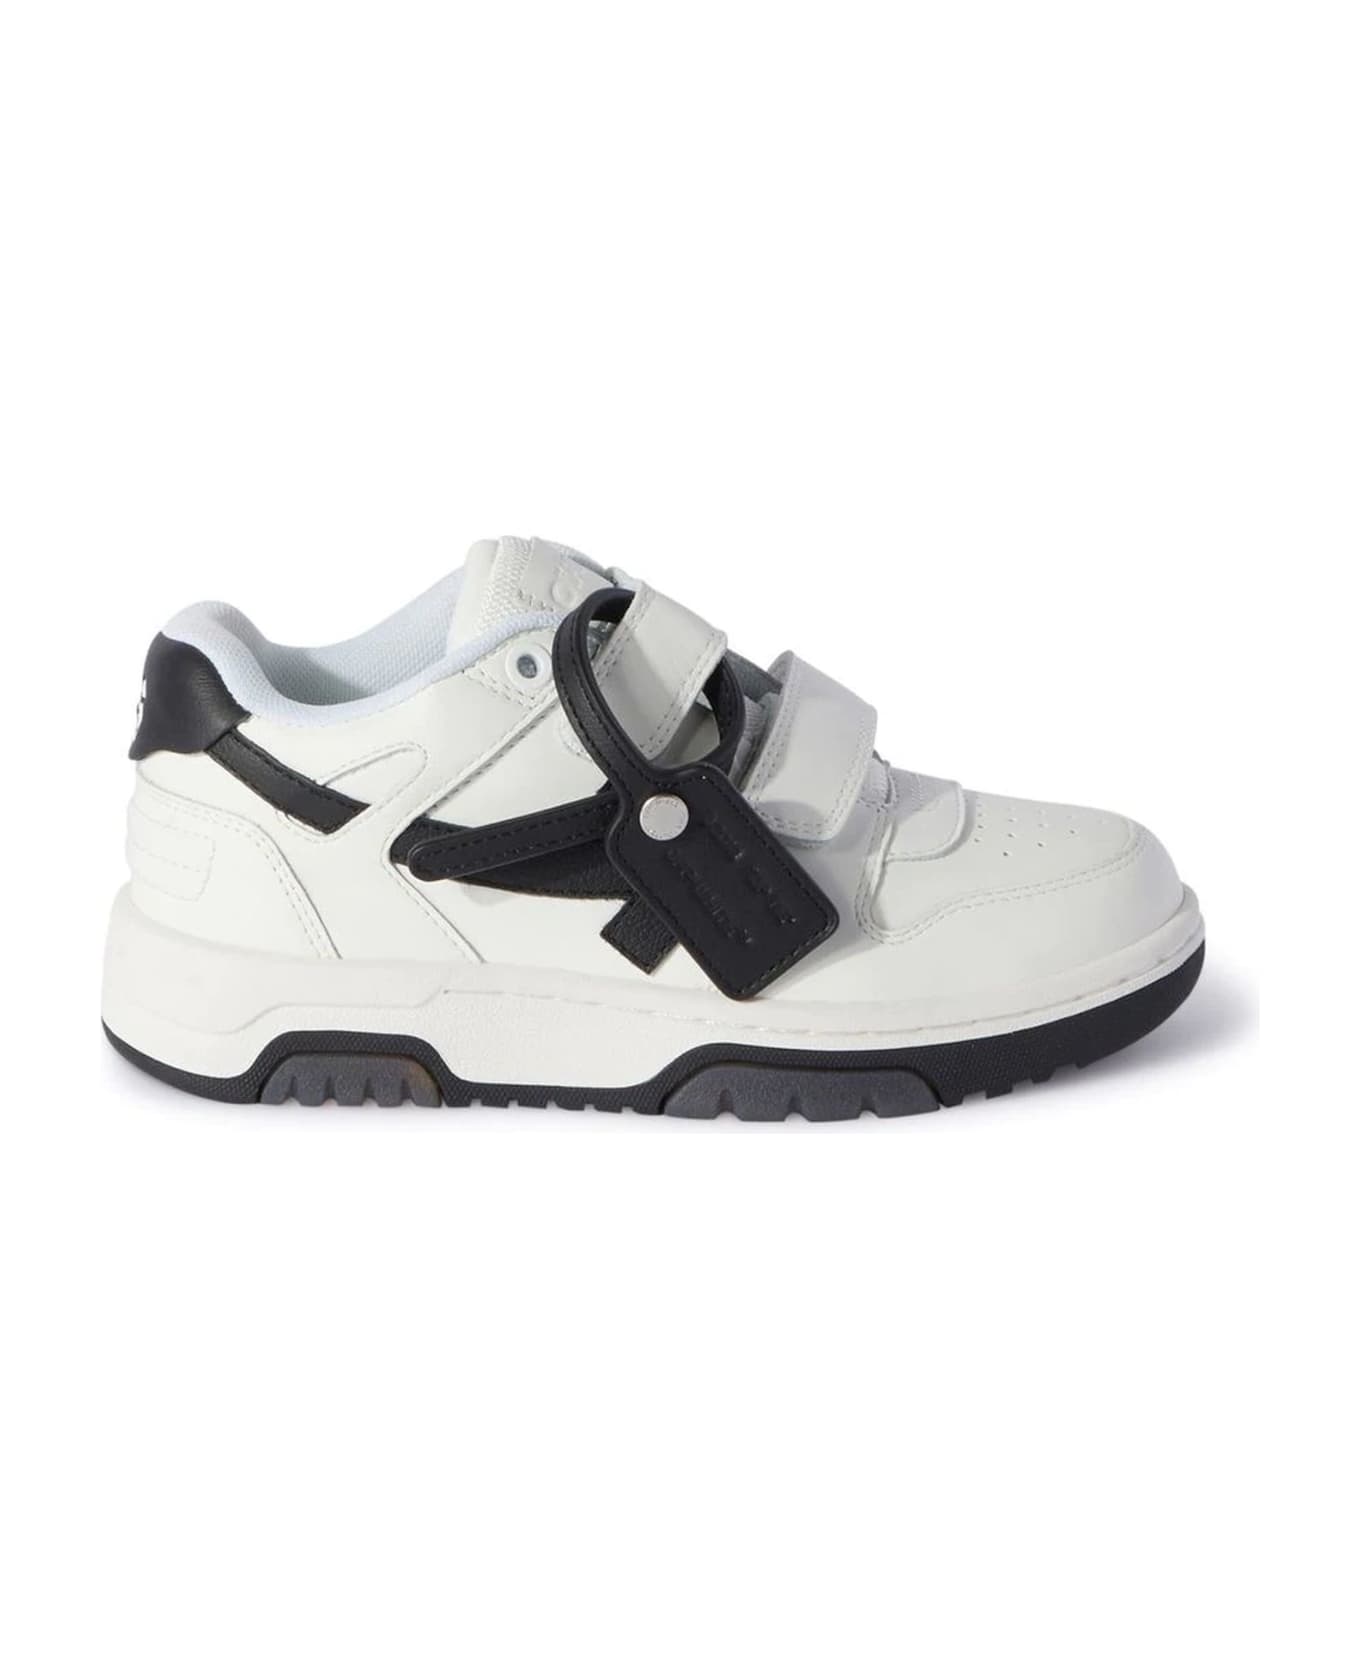 Off-White White Leather Sneakers - Bianco